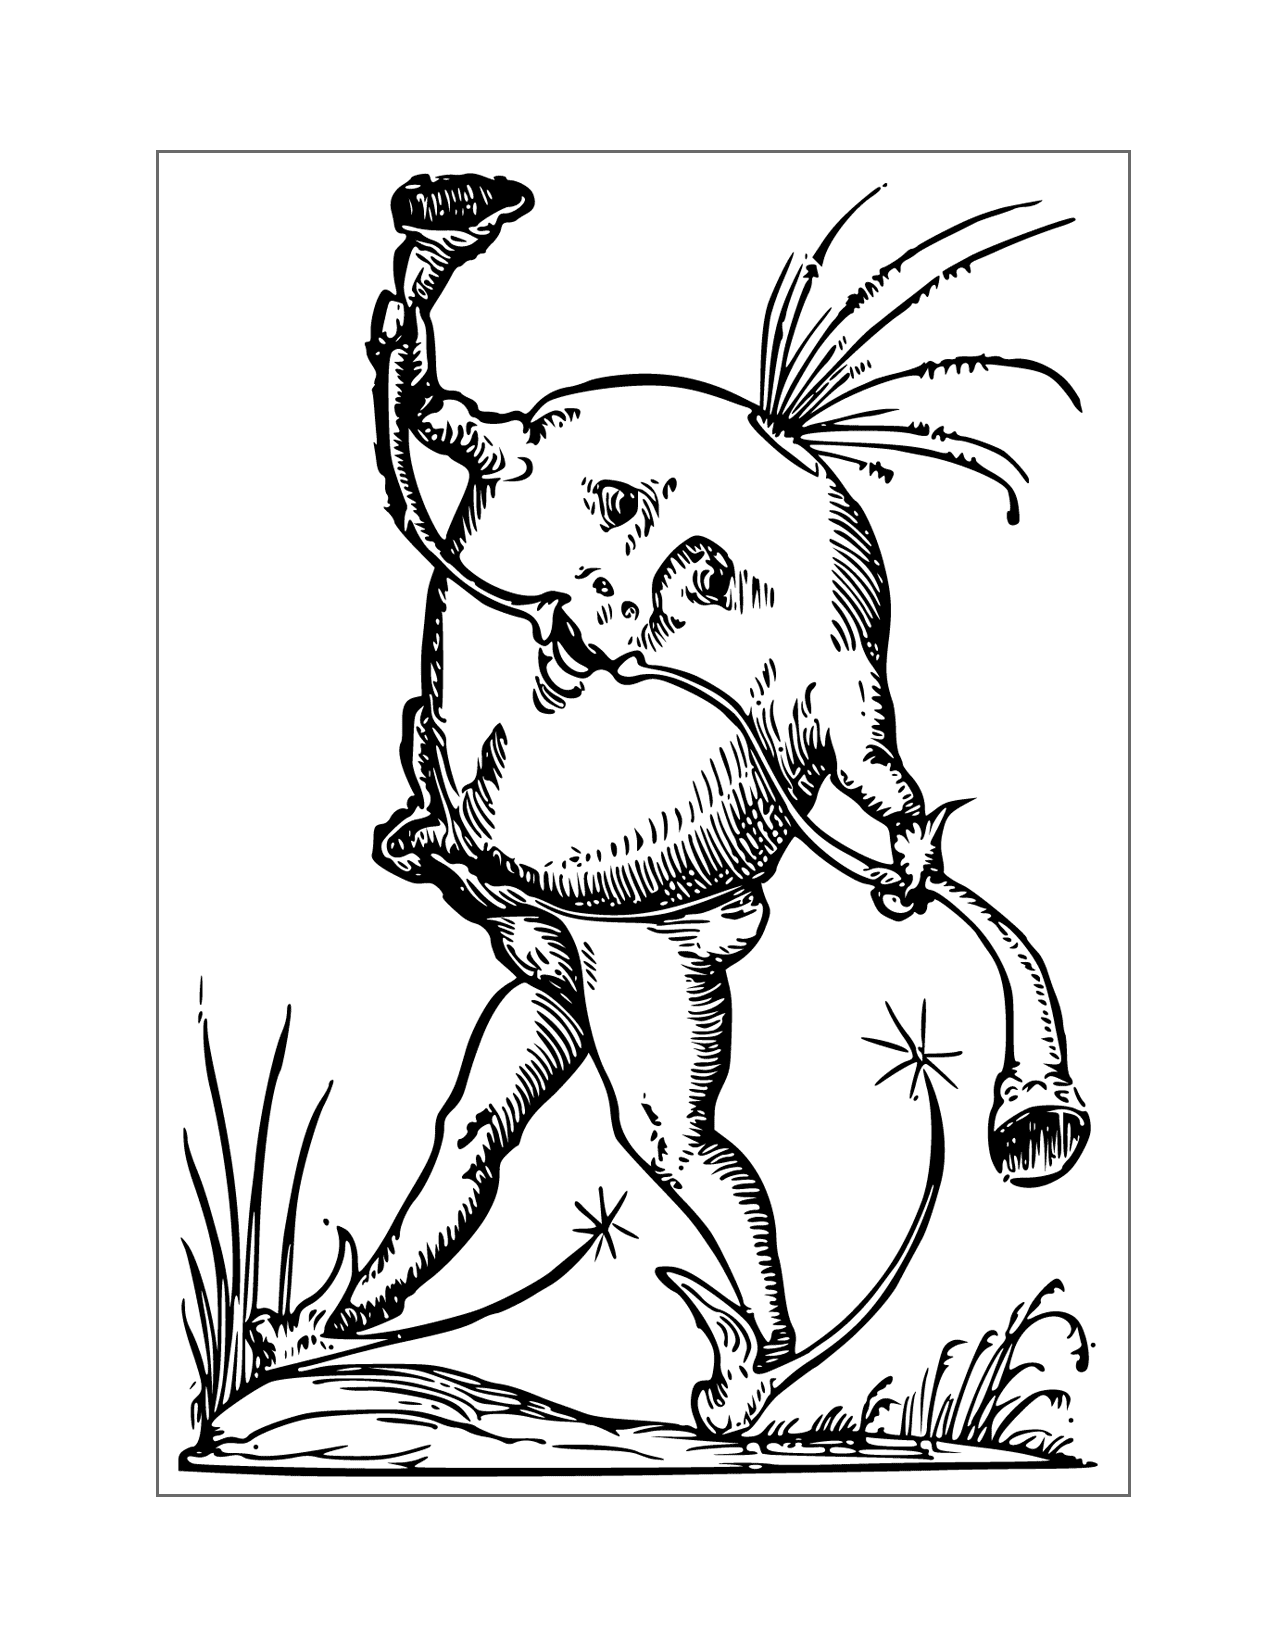 Weird Art Monster Coloring Page 02